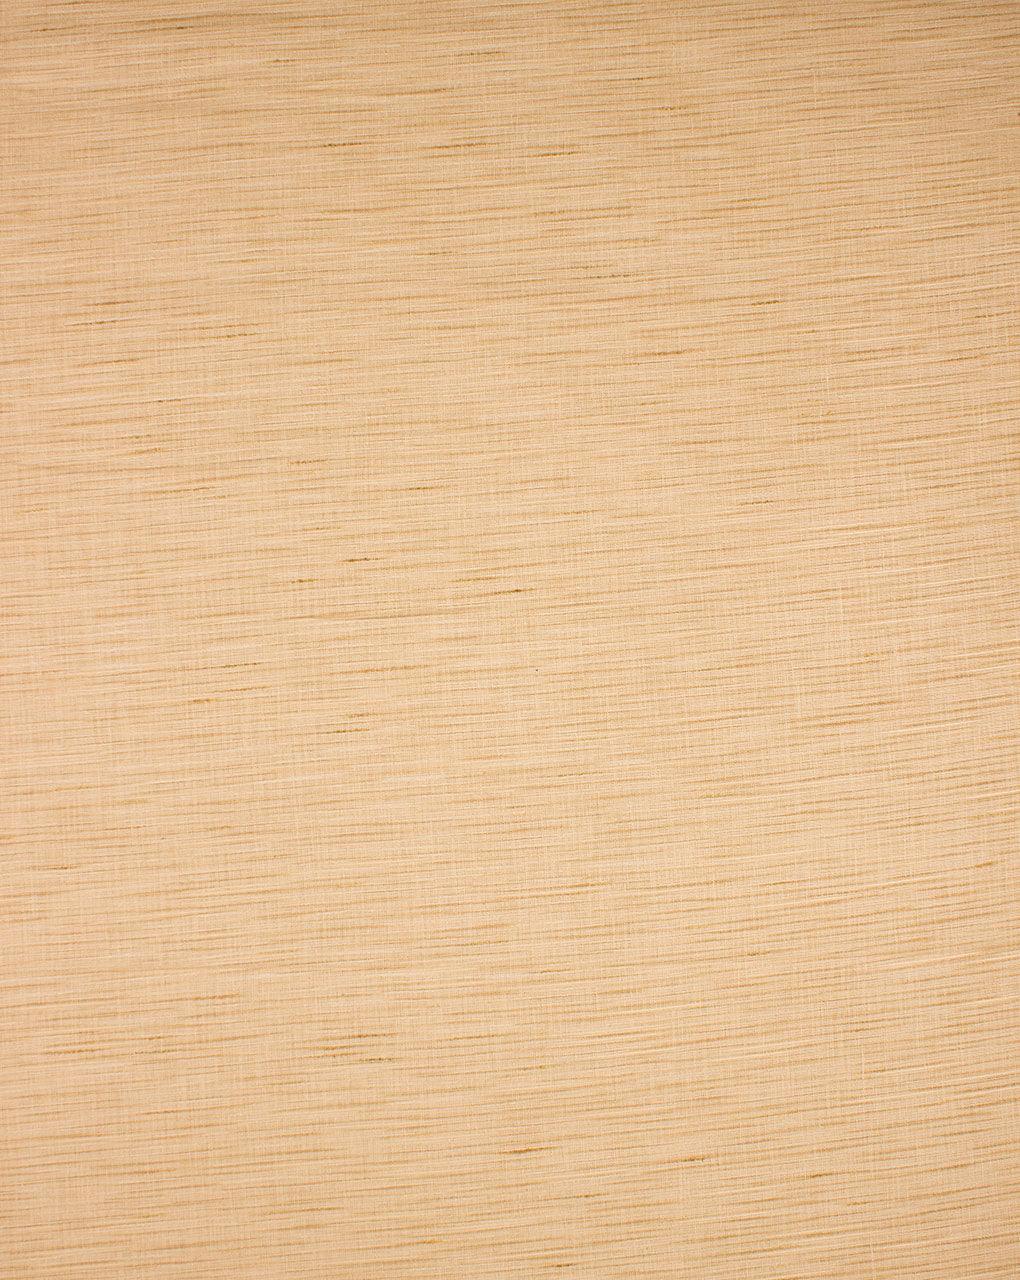 Woven Neps Blended Cotton Fabric ( Width 58 Inch ) - Fabriclore.com